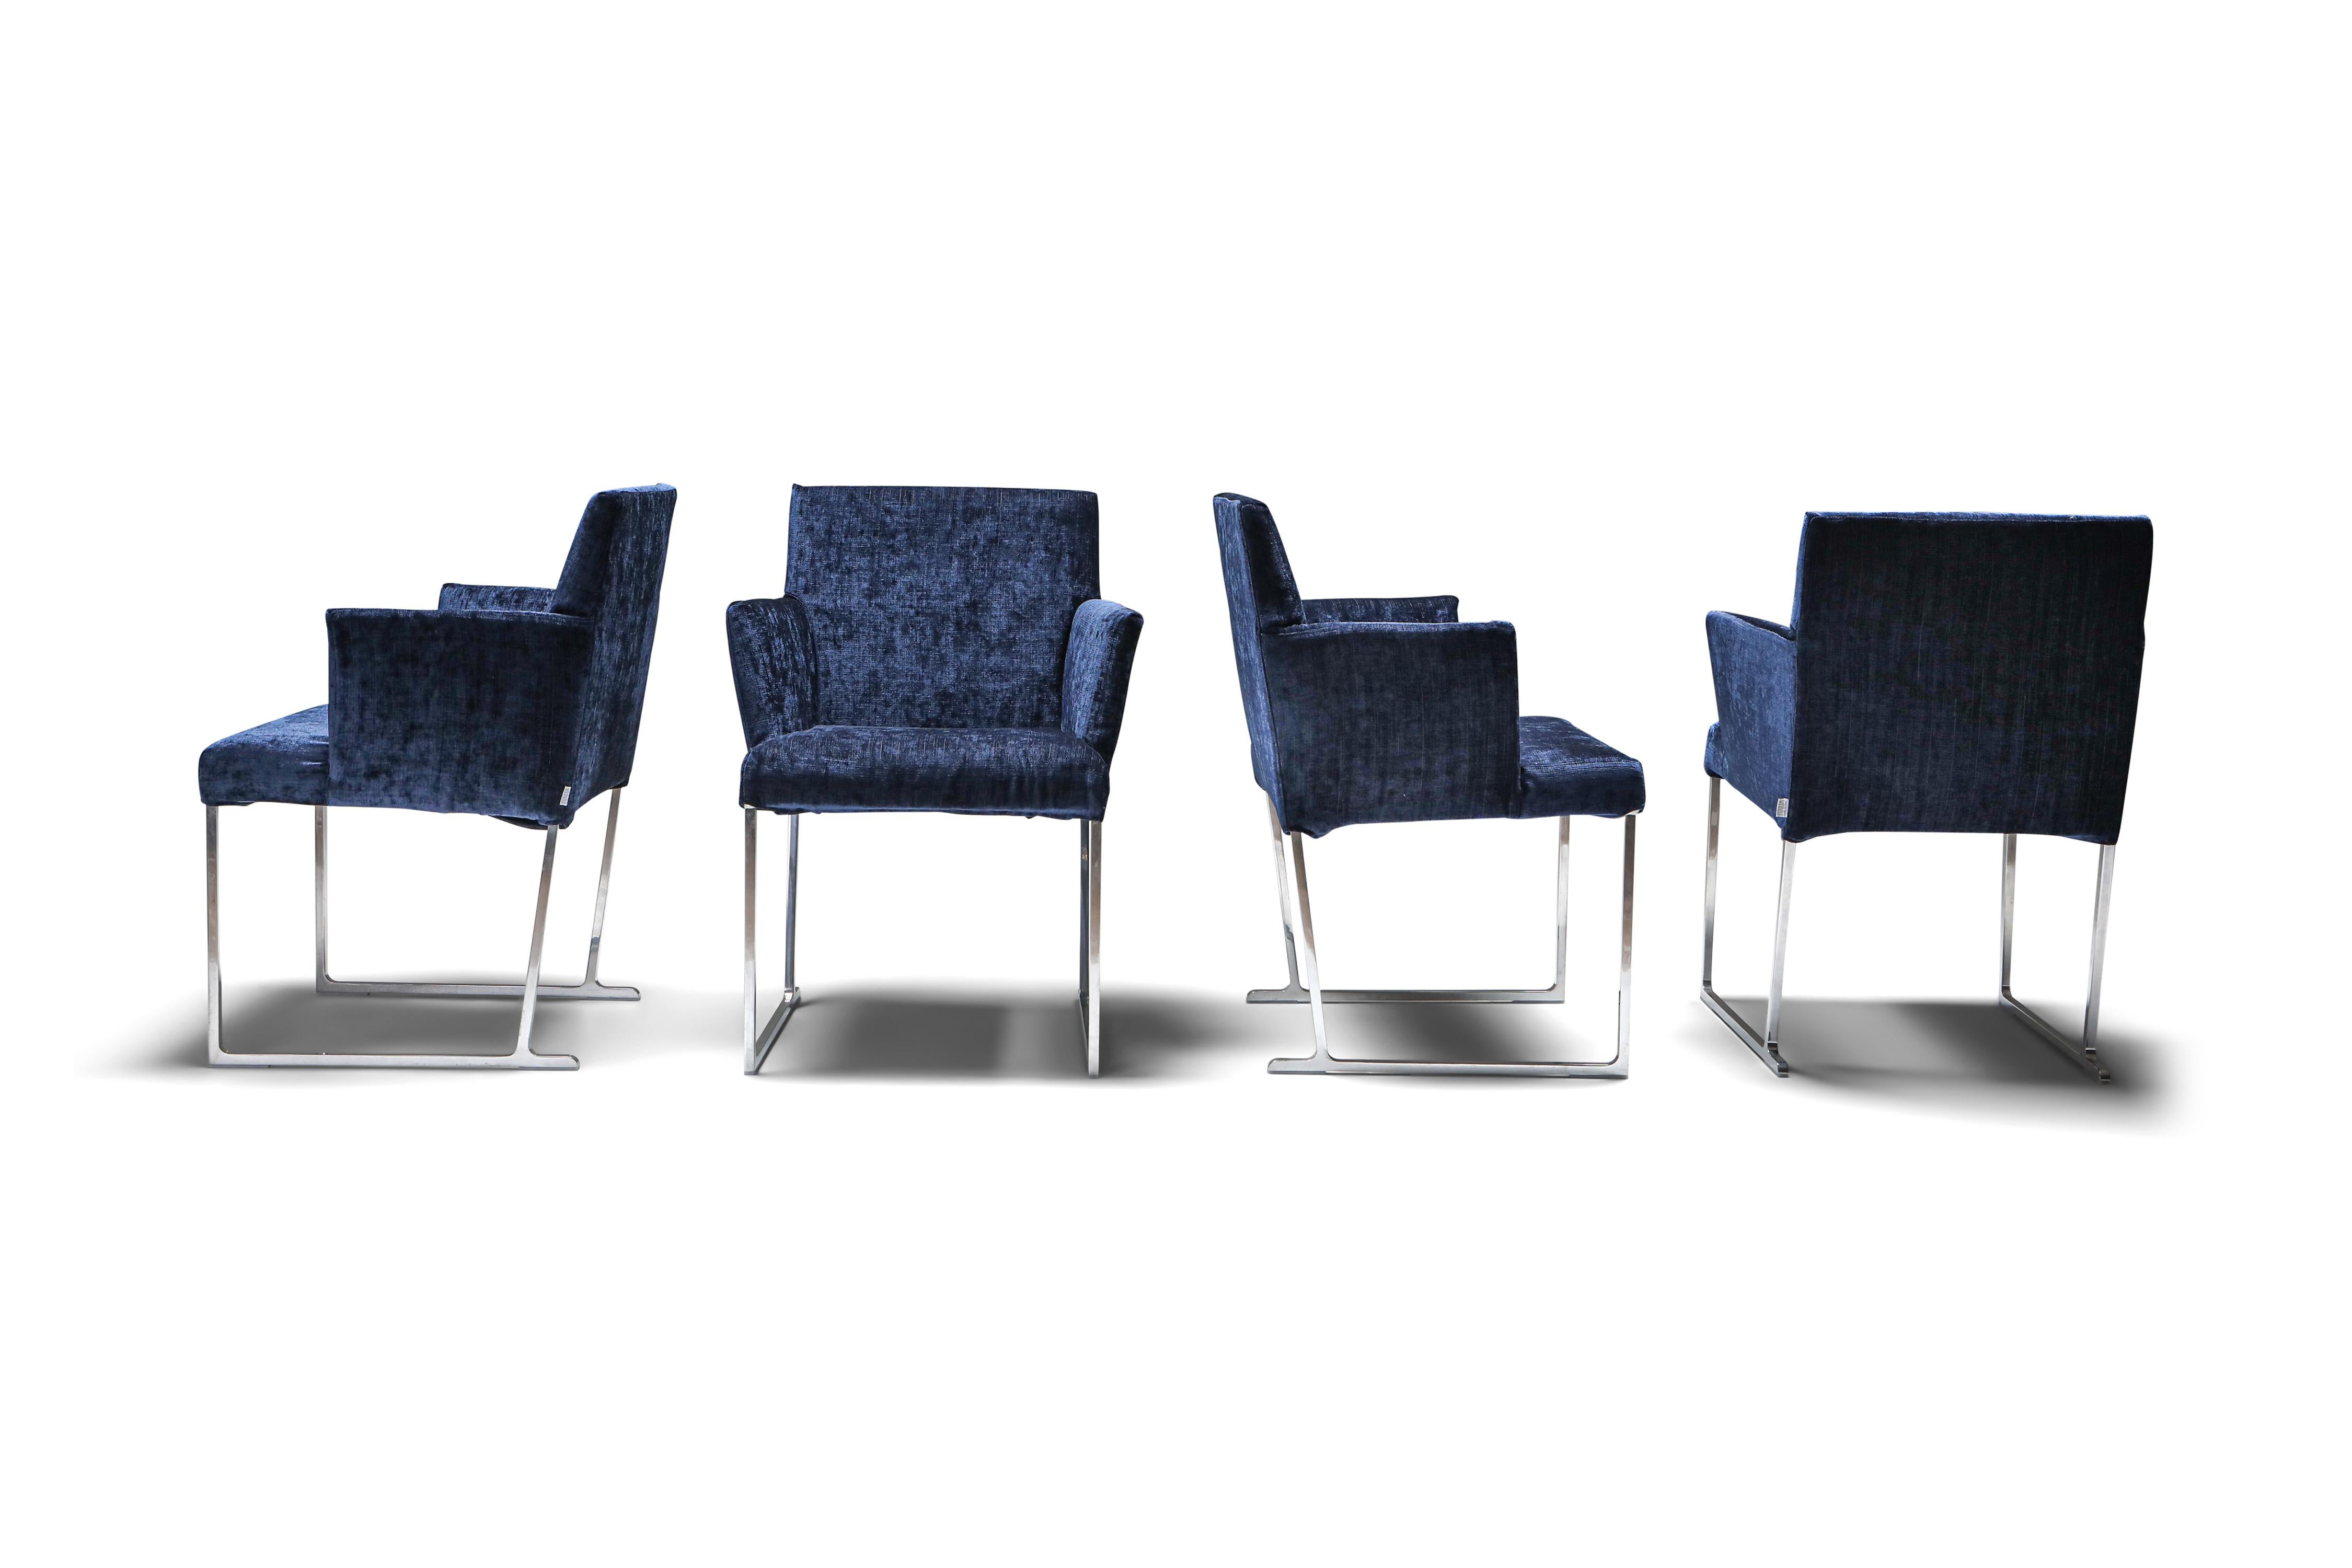 Solo armchairs by Antonio Citterio in luxurious dark blue velvet for B&B Italia. Made under the esteemed B&B Italia brand, these pristine armchairs redefine the concept of contemporary seating with their distinctive features. They are distinguished